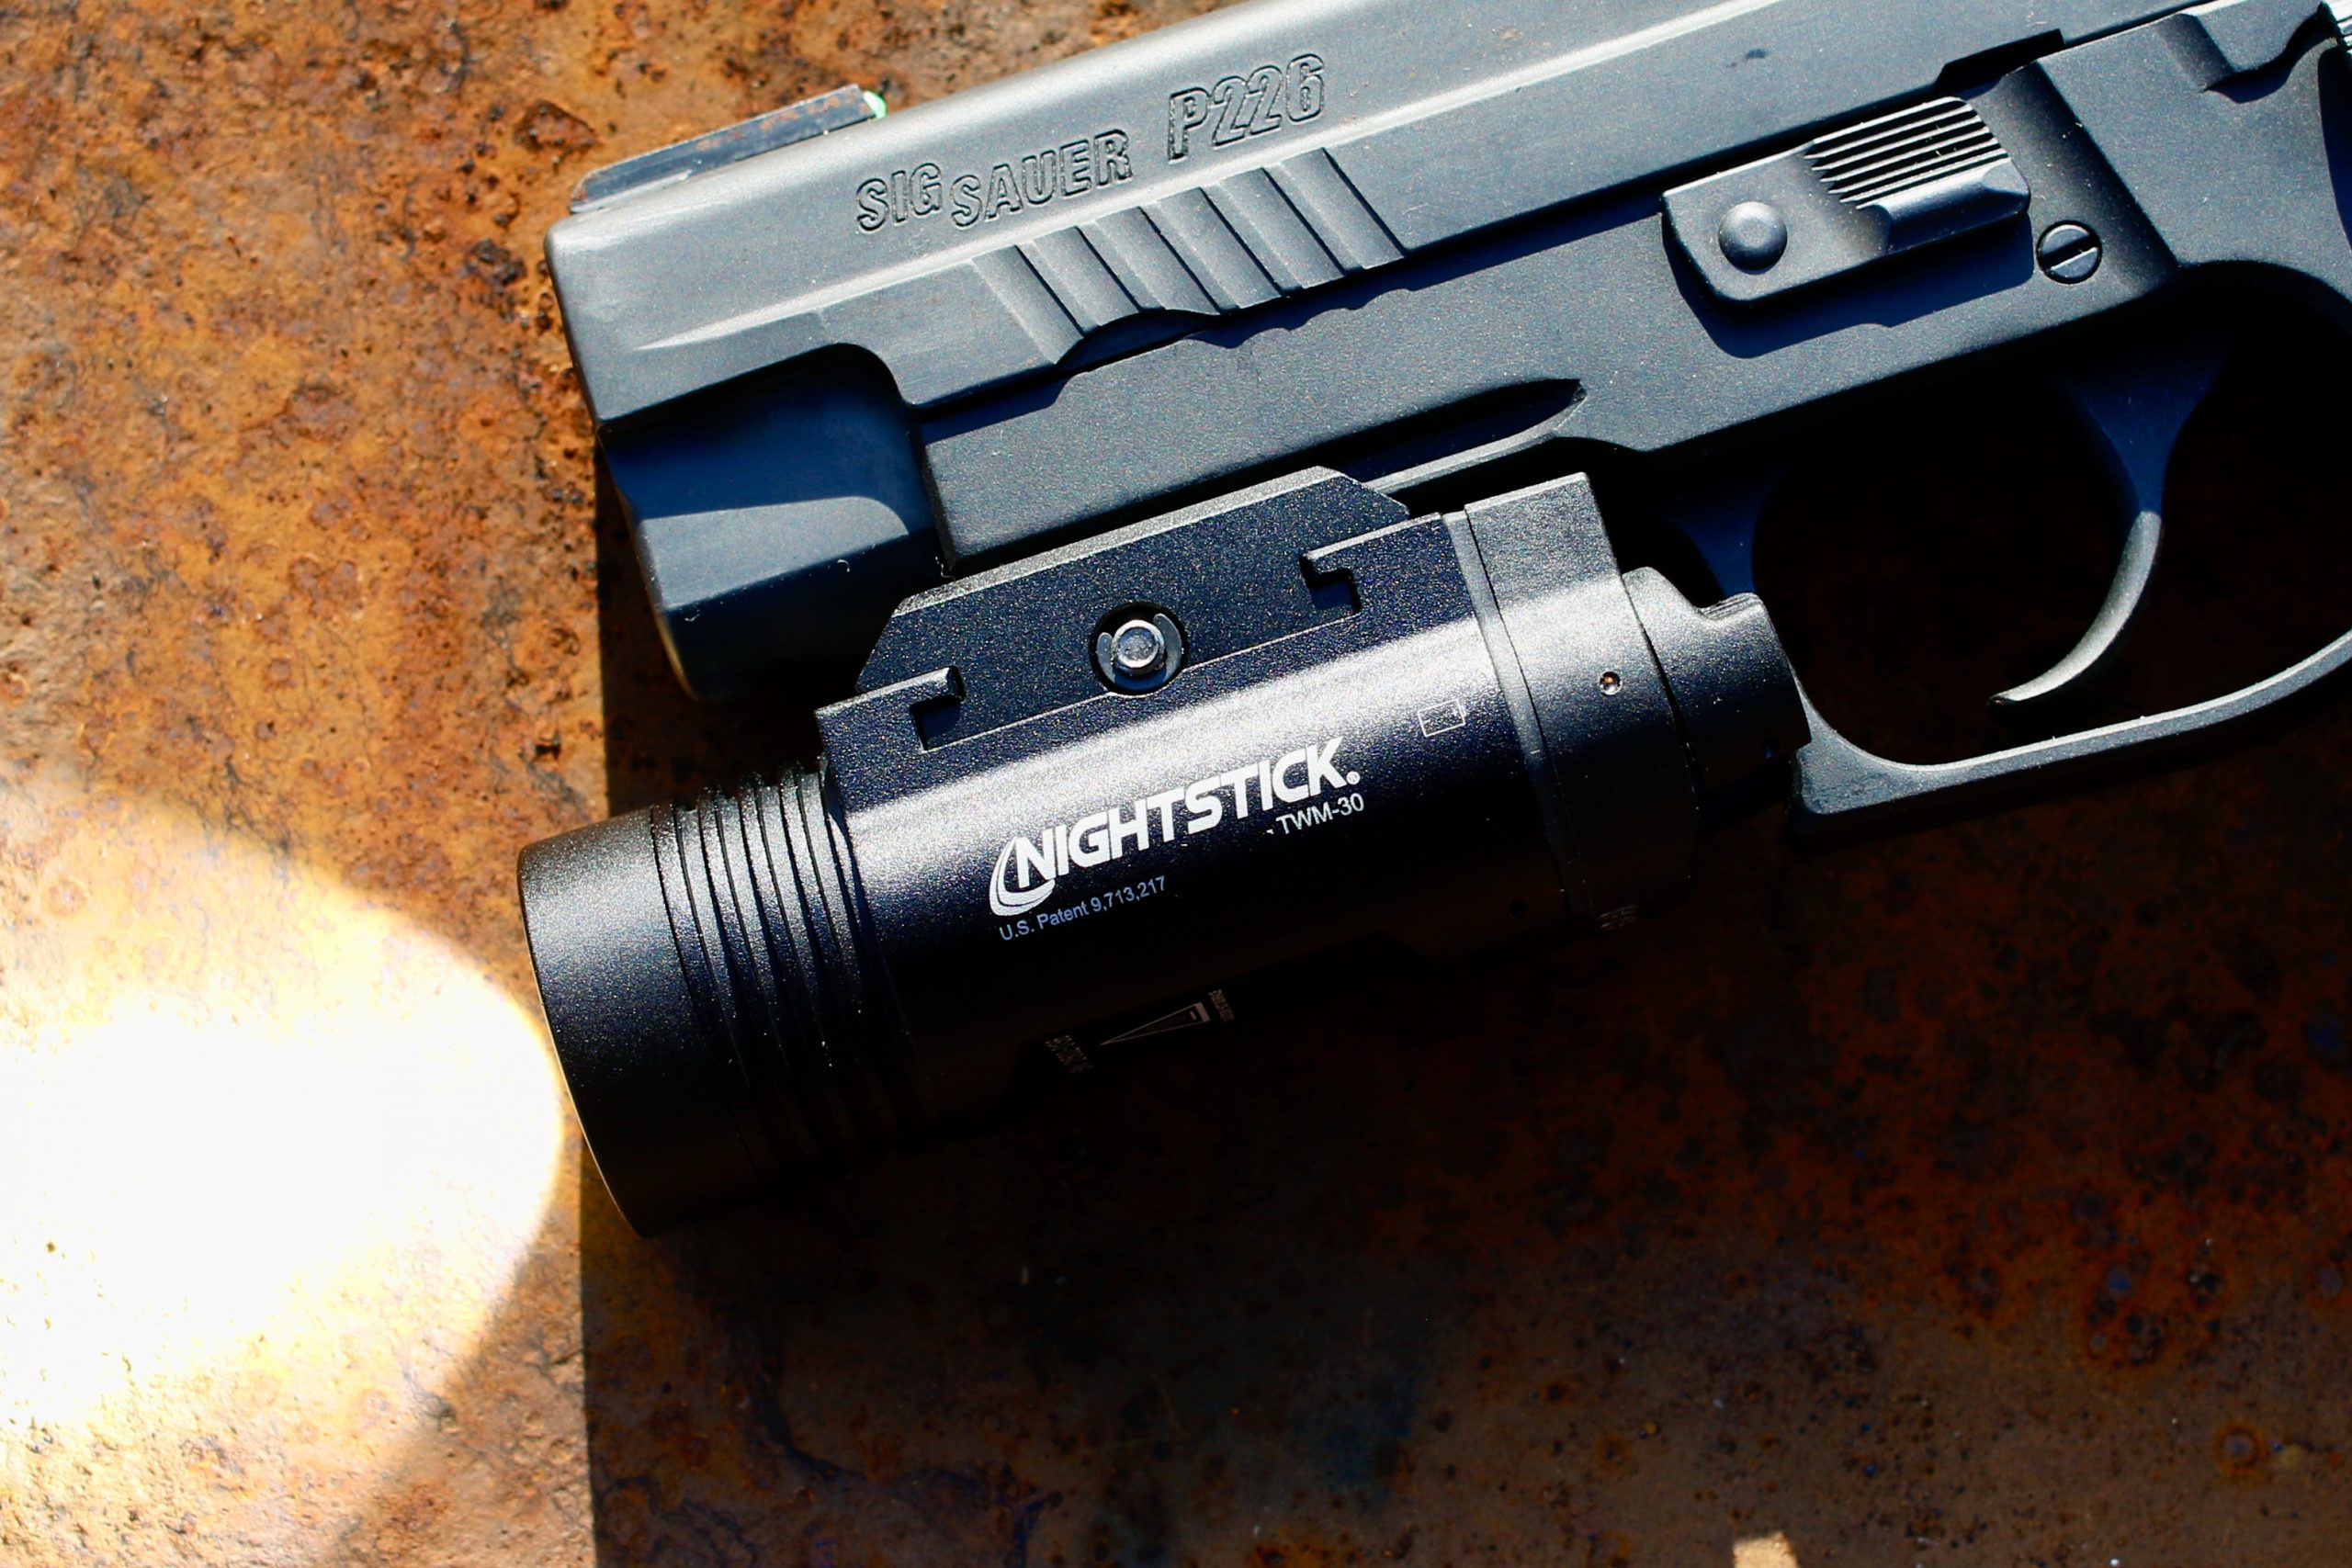 The Nightstick TMW-30 with insert #2 connects in the 1st slot on the P226, but won't go farther back.